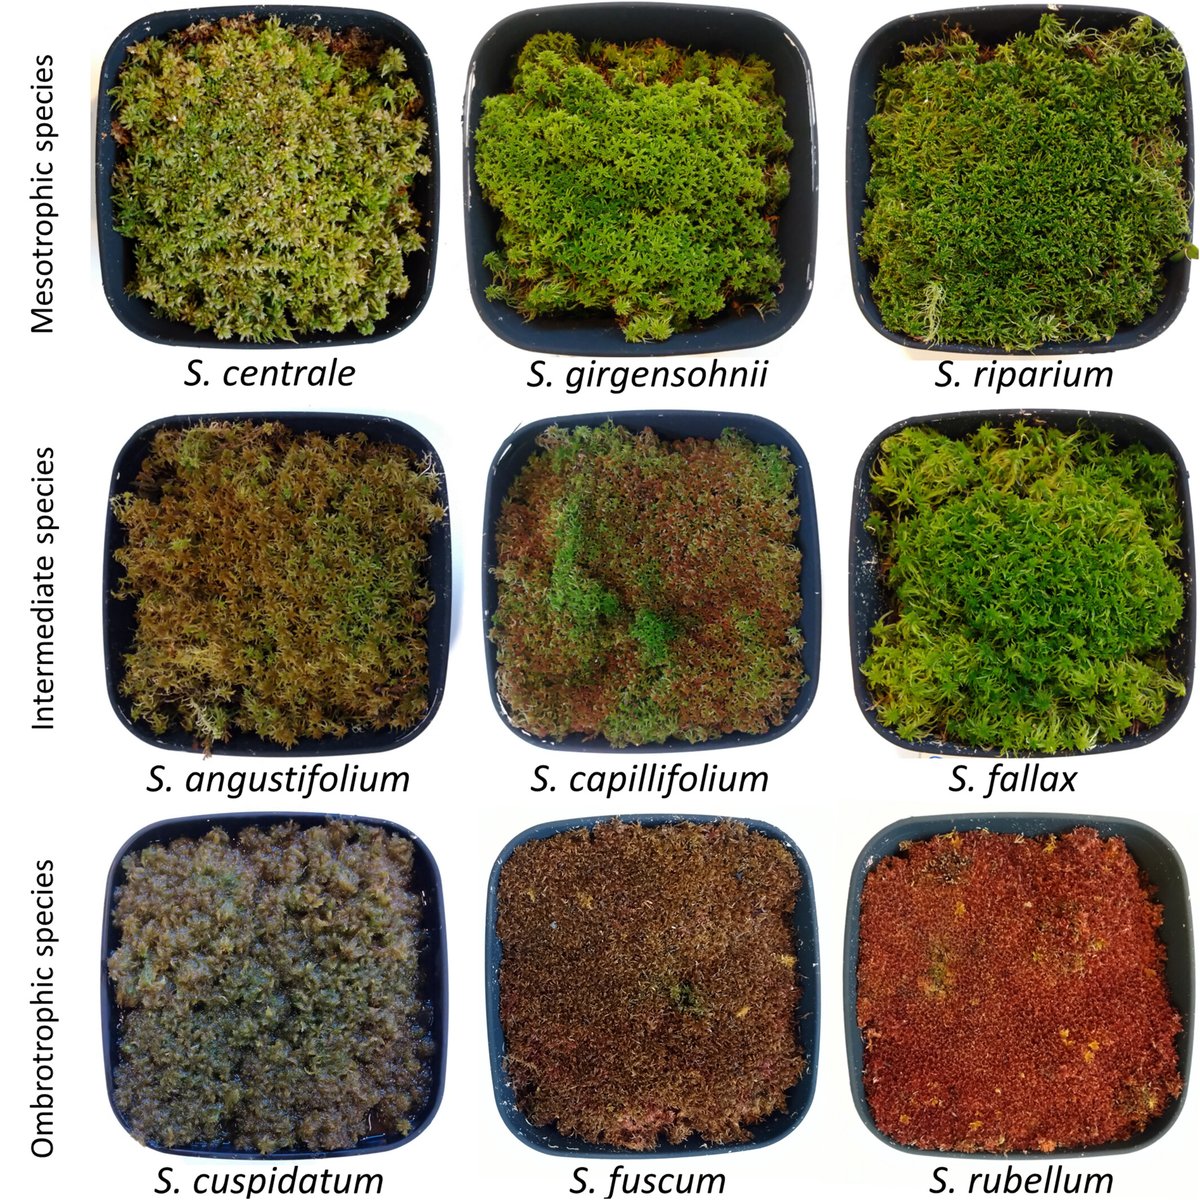 📢New paper out! We show how spectra of 9 boreal #Sphagnum moss species, collected from waterlogged natural conditions after snowmelt, change when the mosses are desiccated. @AaltoUniversity @AaltoENG  Funded by @SuomenAkatemia 
onlinelibrary.wiley.com/doi/full/10.10… #hyperspectral #peatland